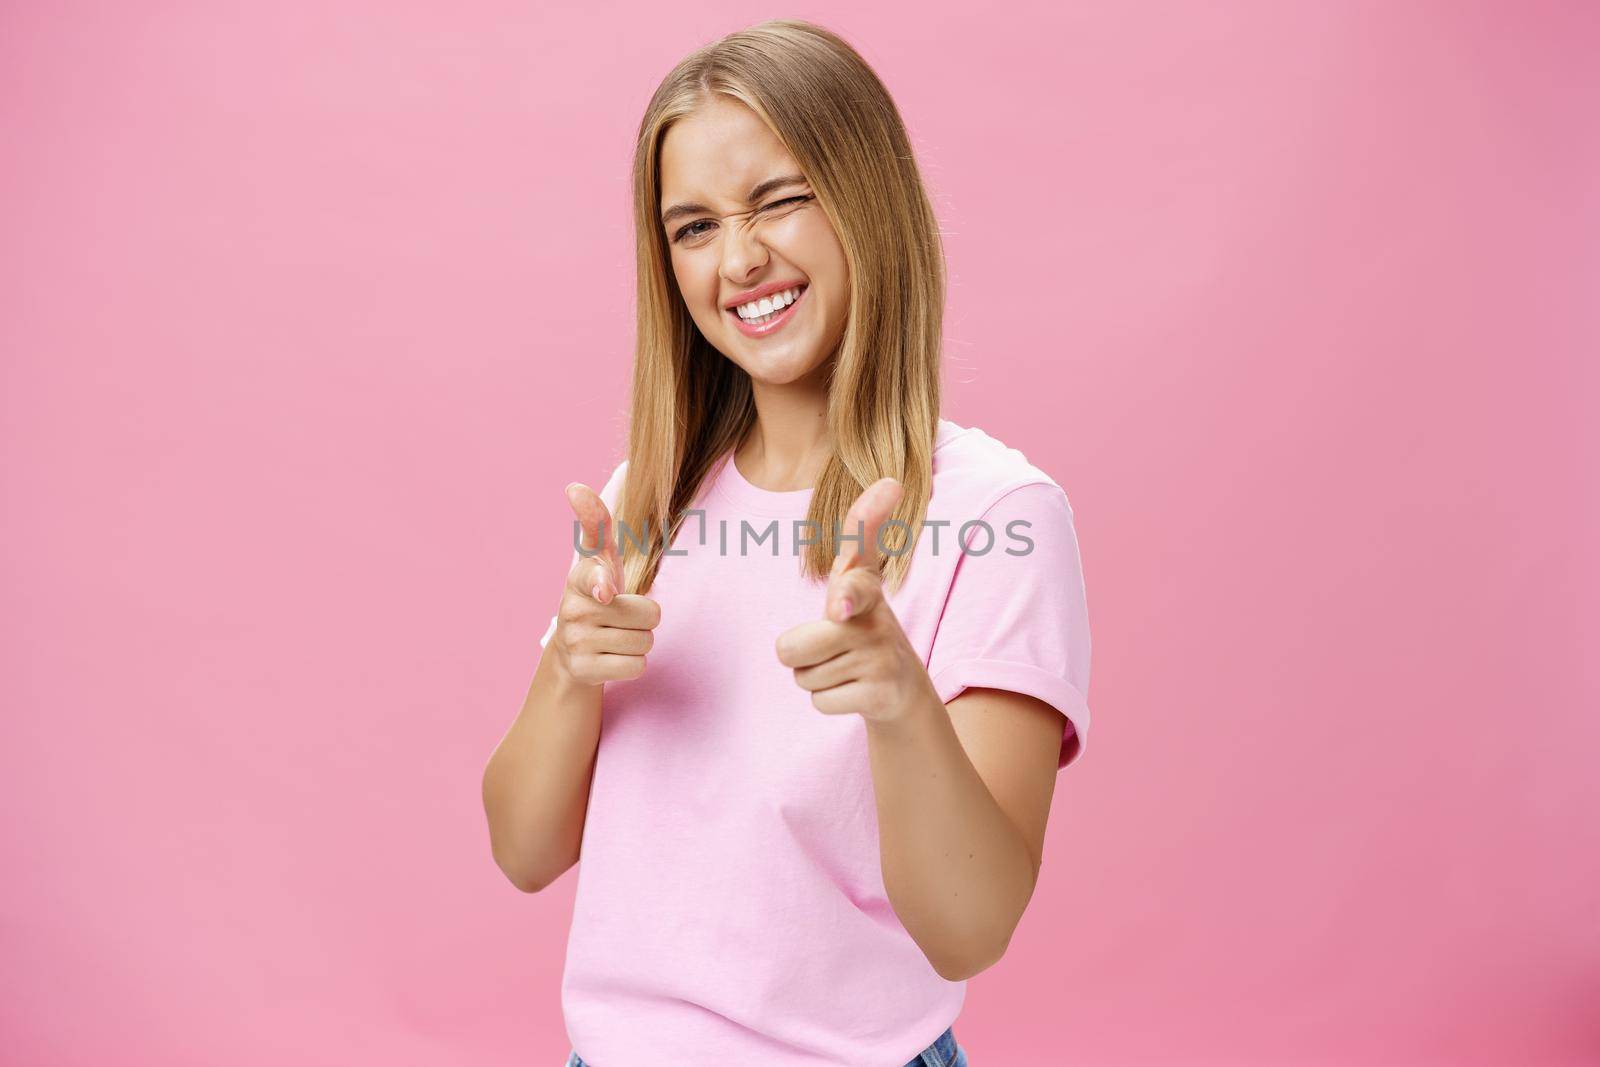 Woman expressing positive attitude towards camera pointing with fingers and winking joyfully smiling being uplifted, standing in good mood with optimistic gestures against pink background. Copy space